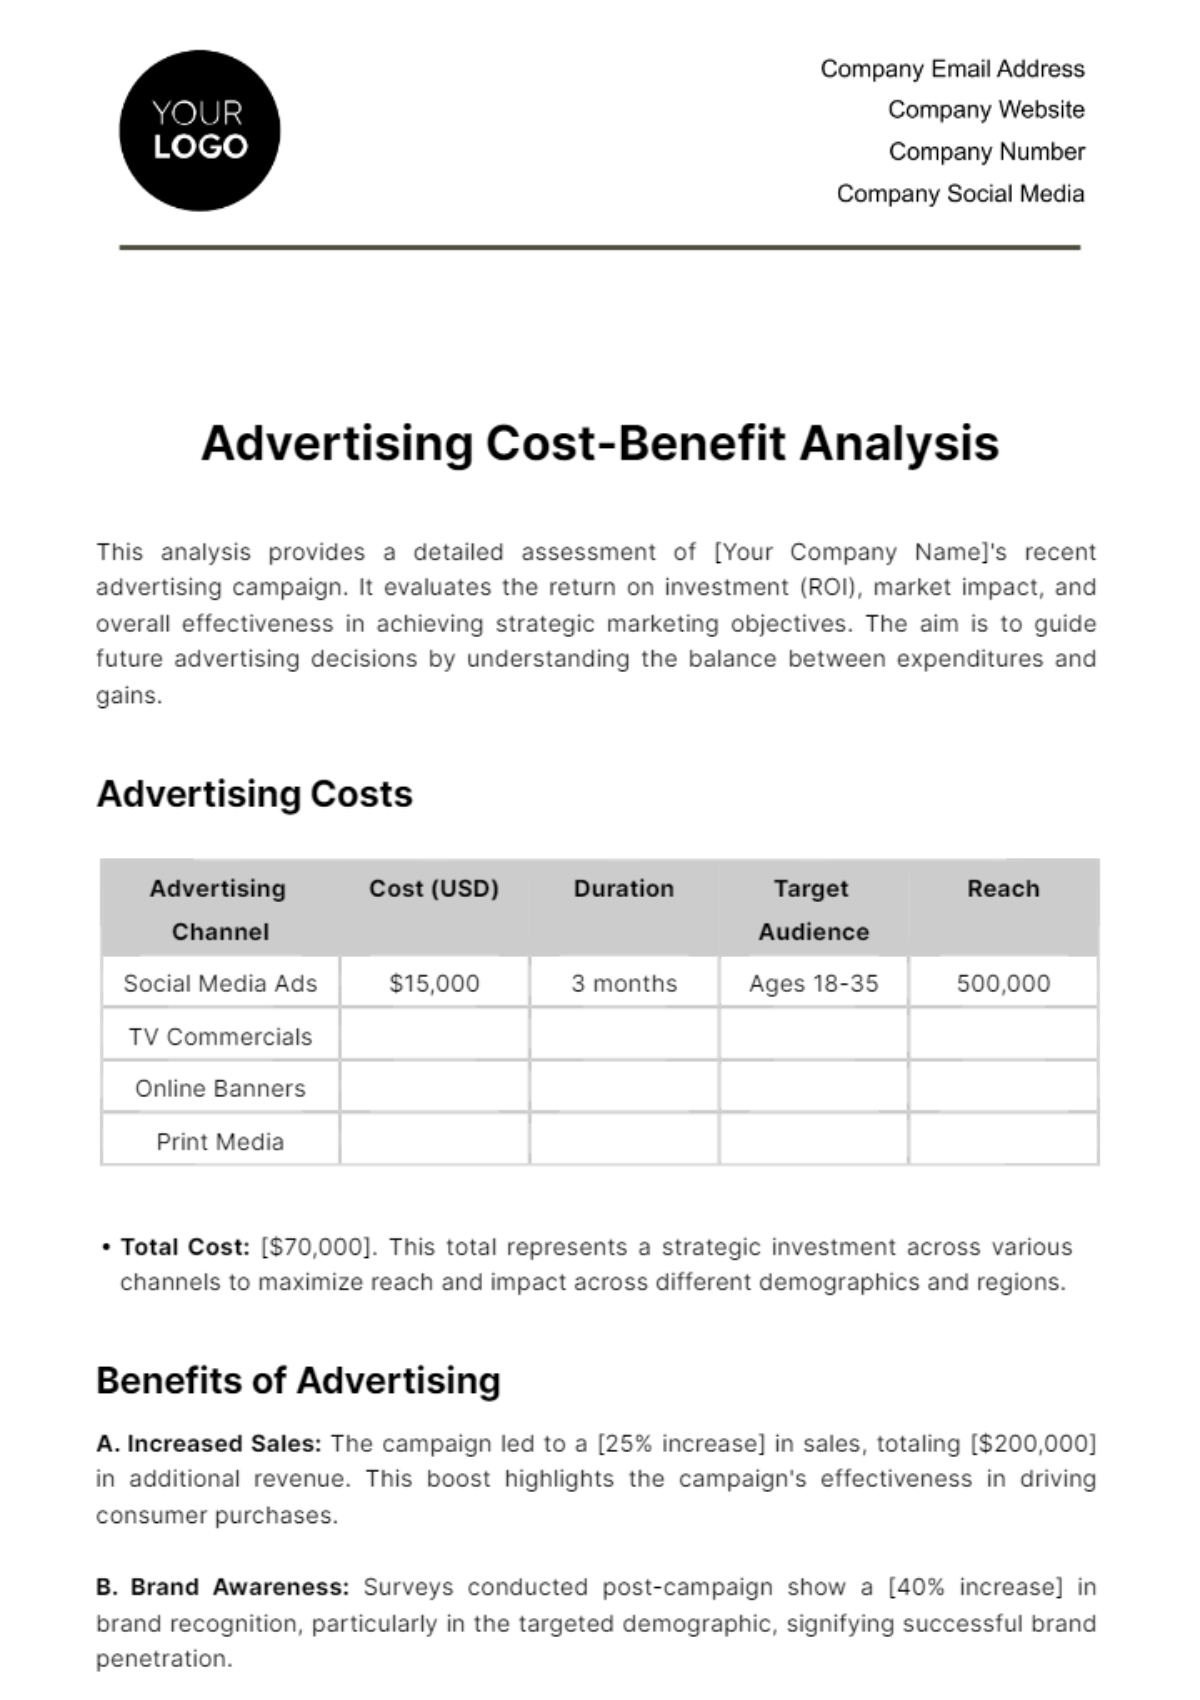 Free Advertising Cost-Benefit Analysis Template